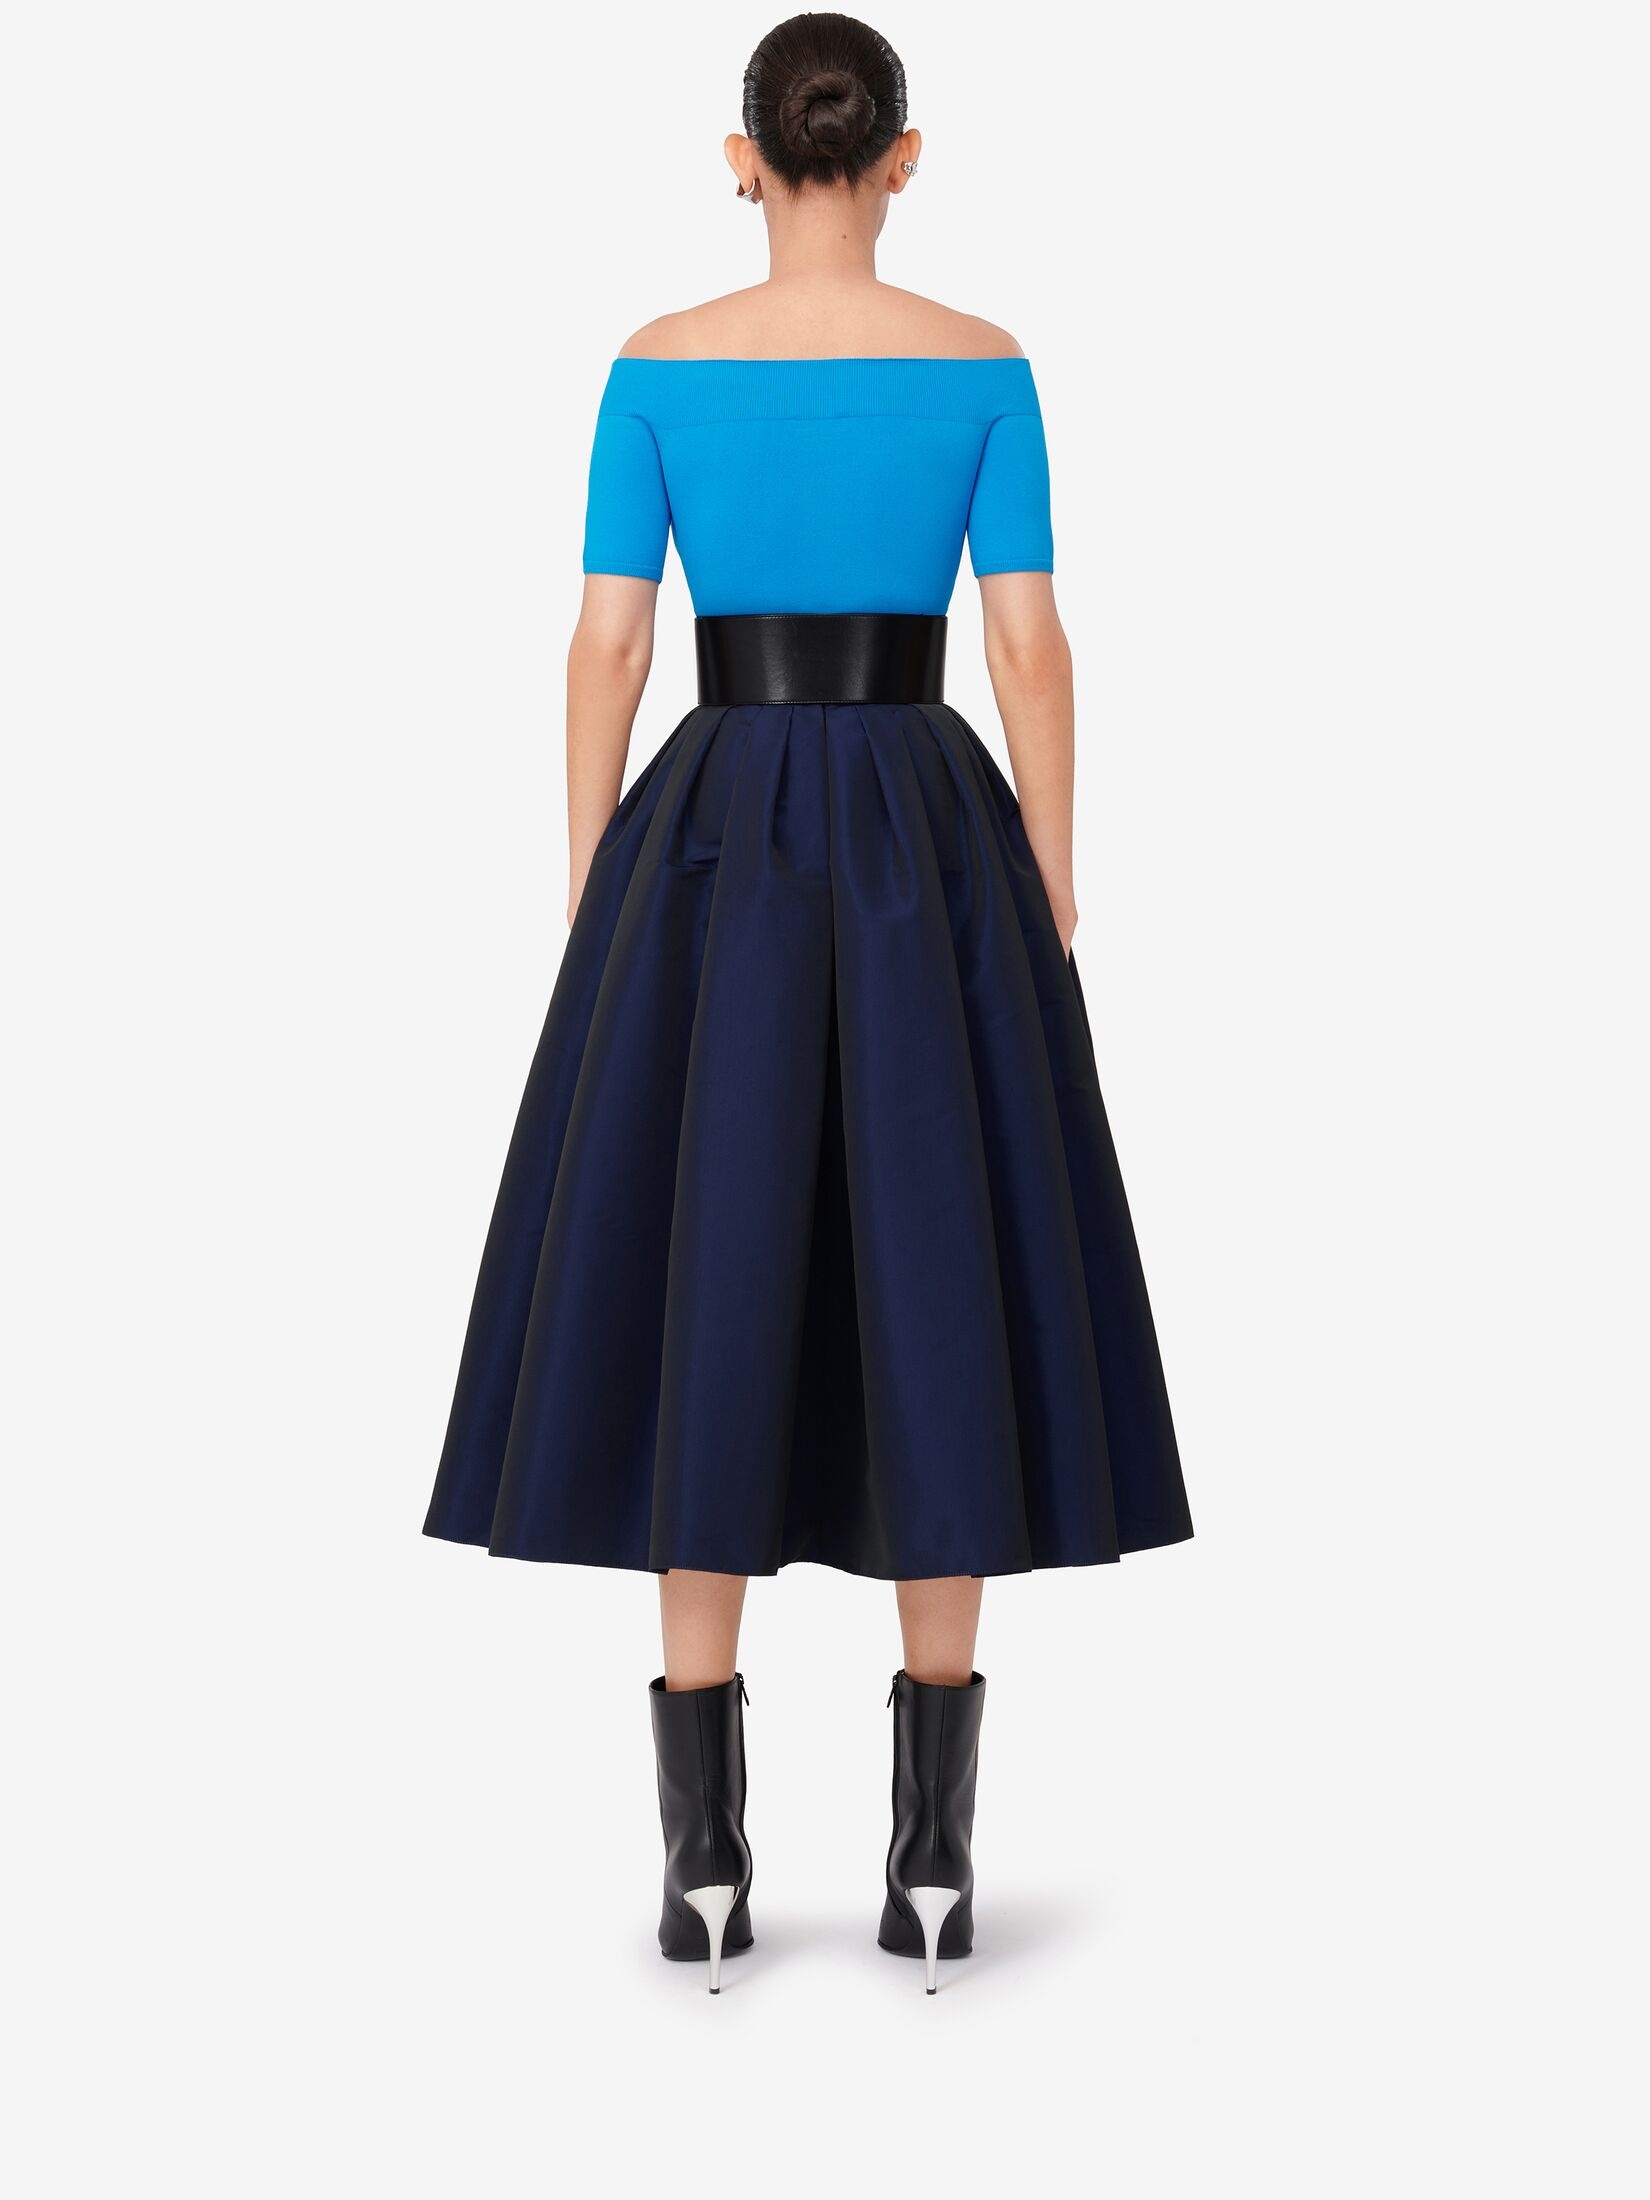 Women's Pleated Midi Skirt in Electric Navy - 4